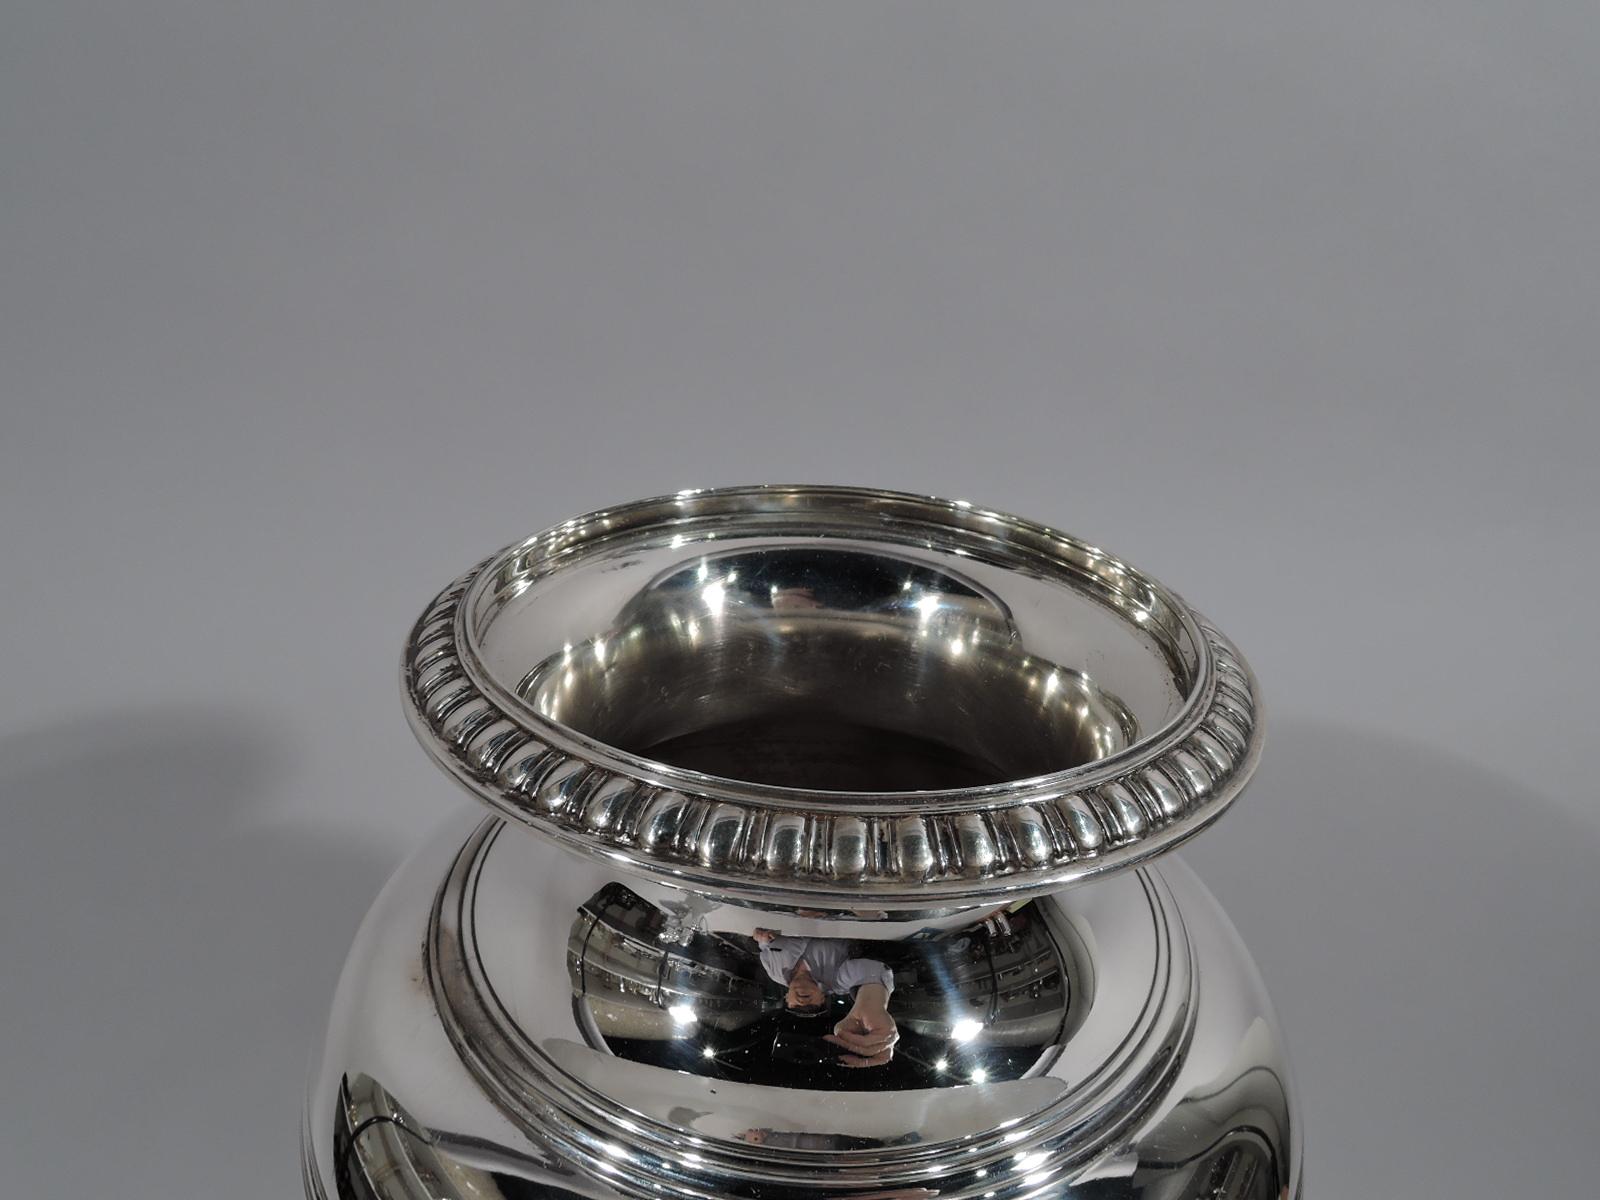 Tall Art Deco classical sterling silver vase. Made by Tiffany & Co. in New York, circa 1920. Baluster with curved shoulder and round foot. Body and neck plain with contrasting stylized ornament: Classical leaf-and-dart on foot and bead-and-reel on